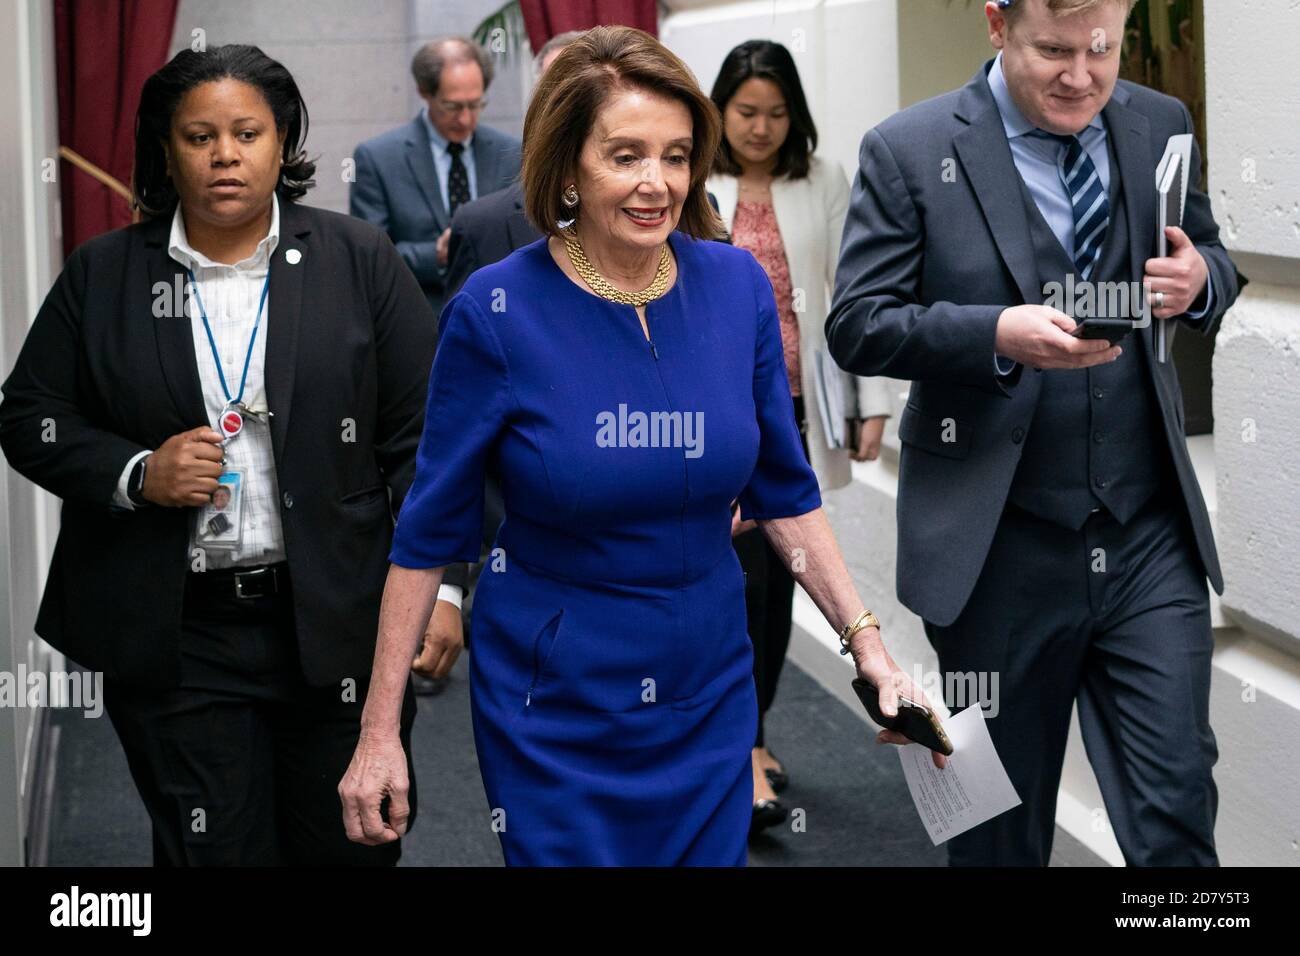 Representative Nancy Pelosi, Democrat of California and Speaker of the House, walks to a Democratic caucus meeting at the U.S. Capitol in Washington, D.C. on May 22, 2019. Credit: Alex Edelman/The Photo Access Stock Photo